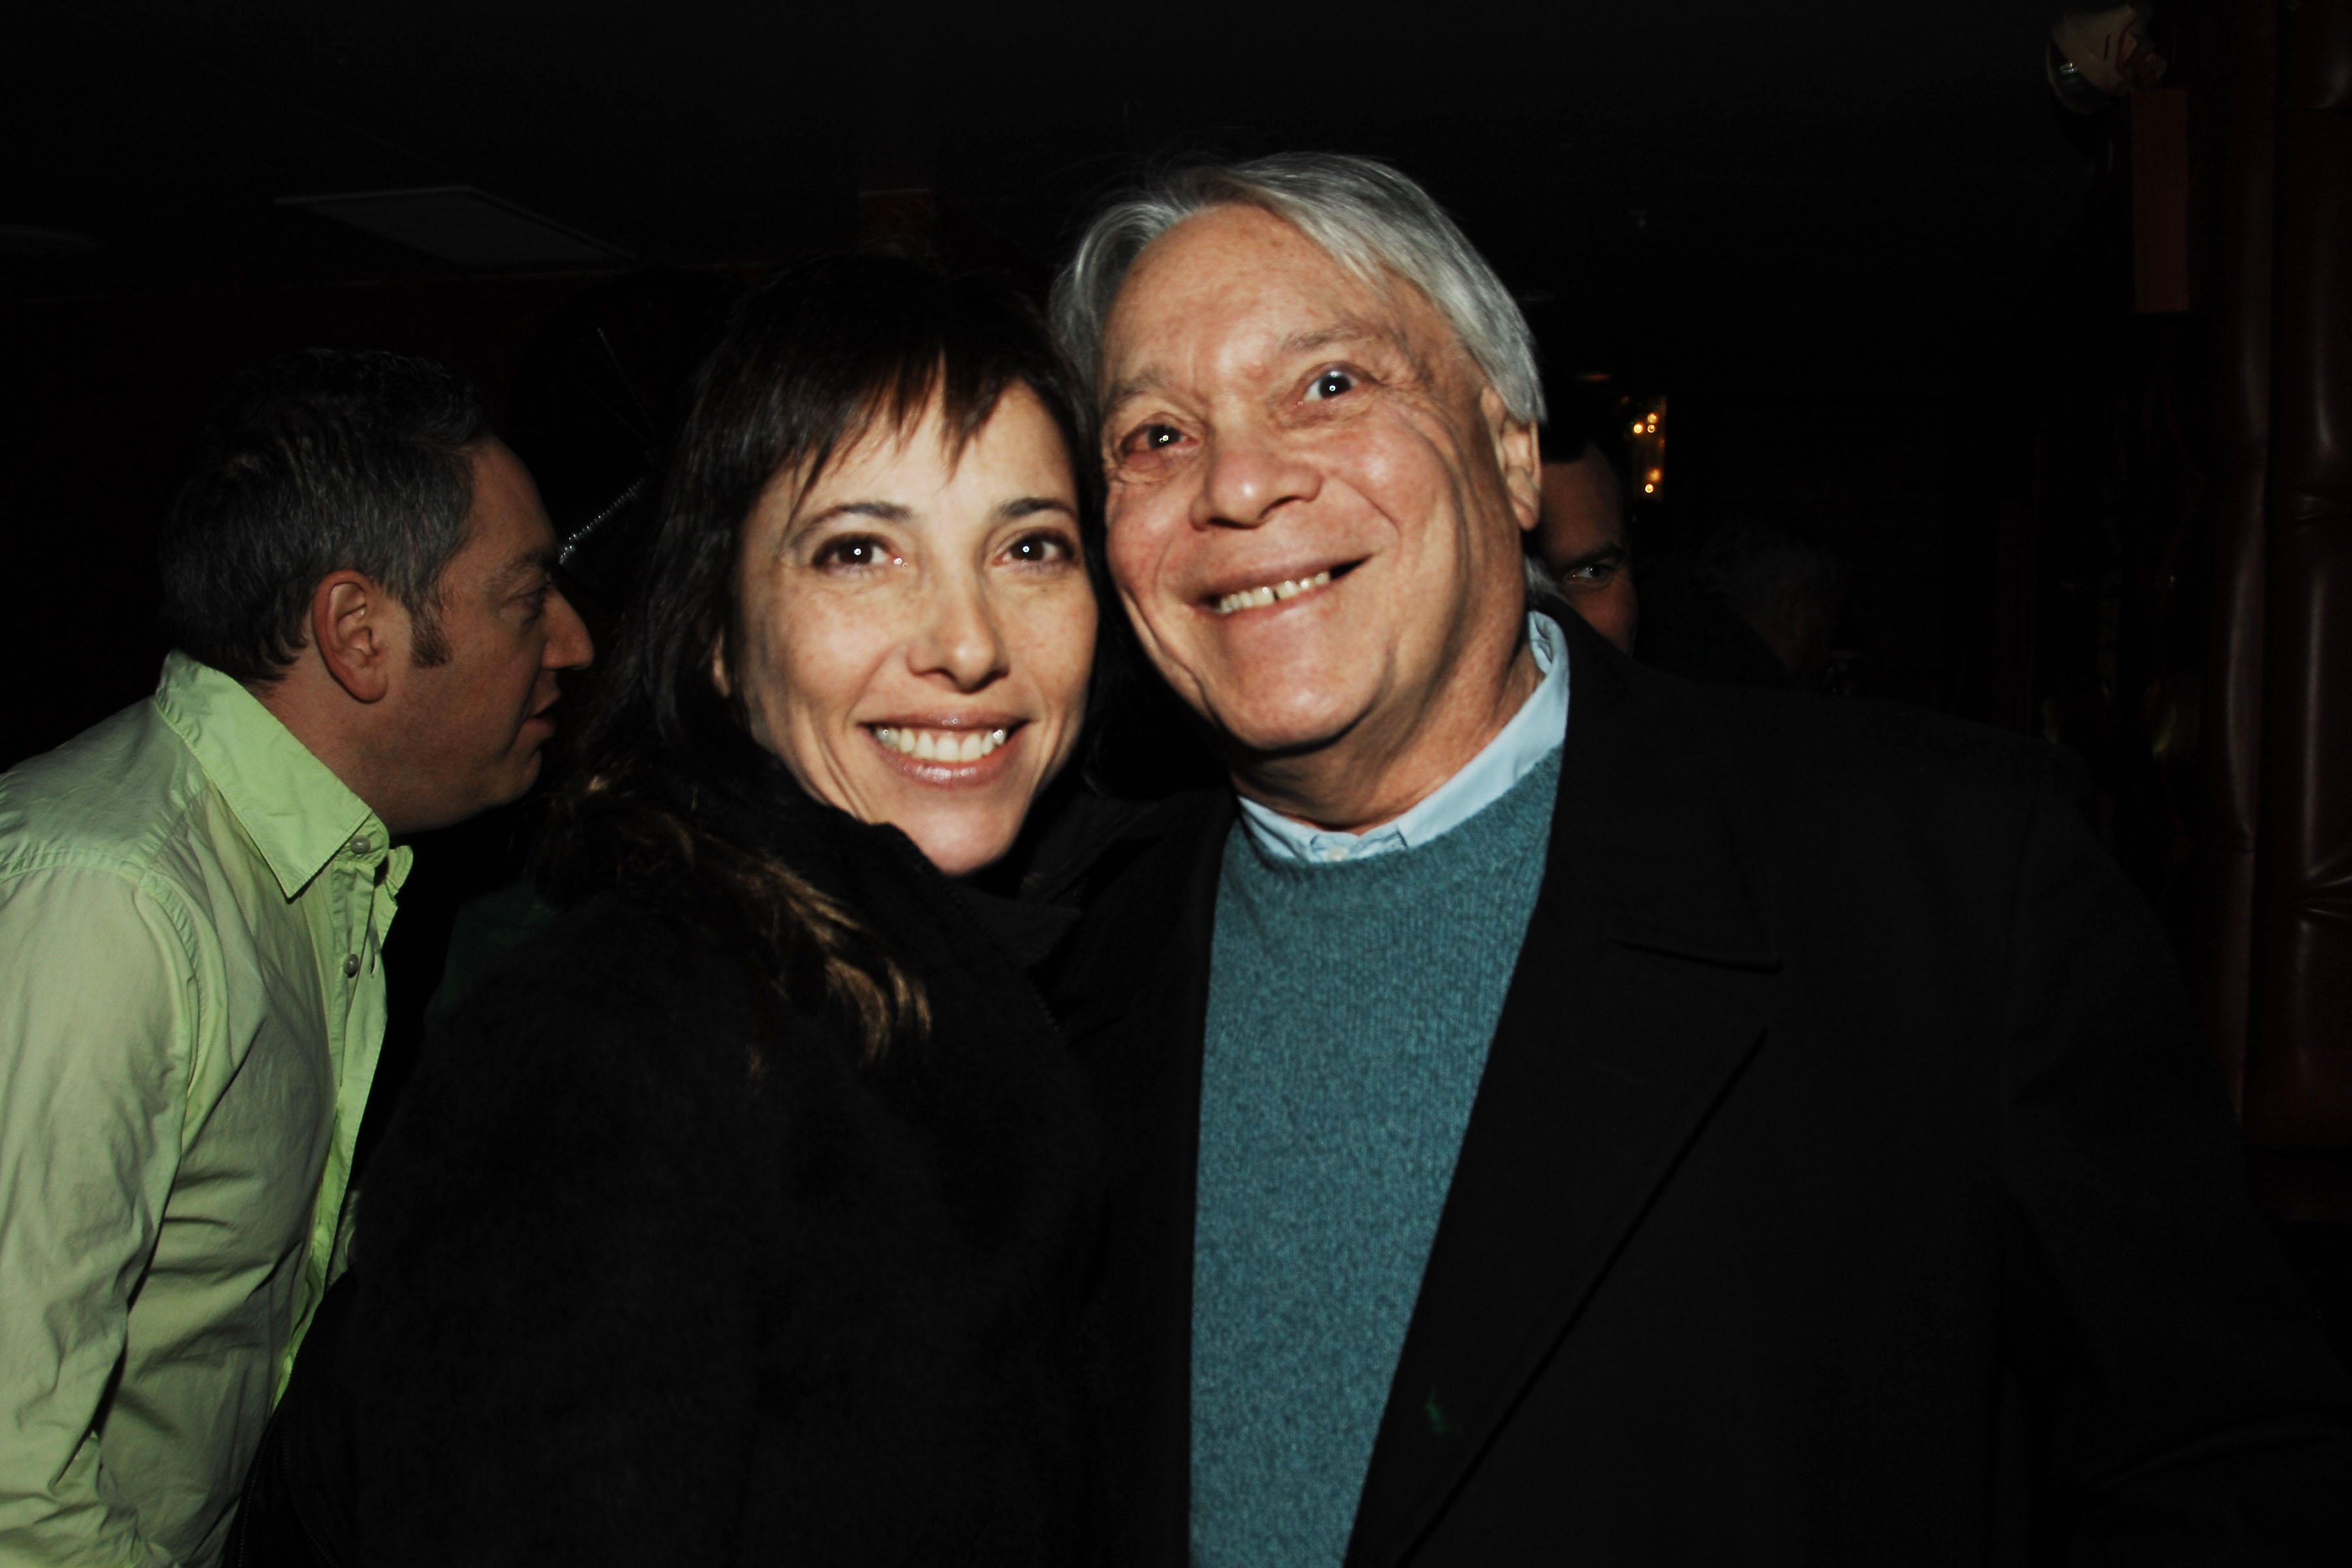 Christina Oxenberg and John Ryanhold at the Annual Patrick McMullan St. Patricks Day Party on March 17, 2008, in New York City | Source: Getty Images